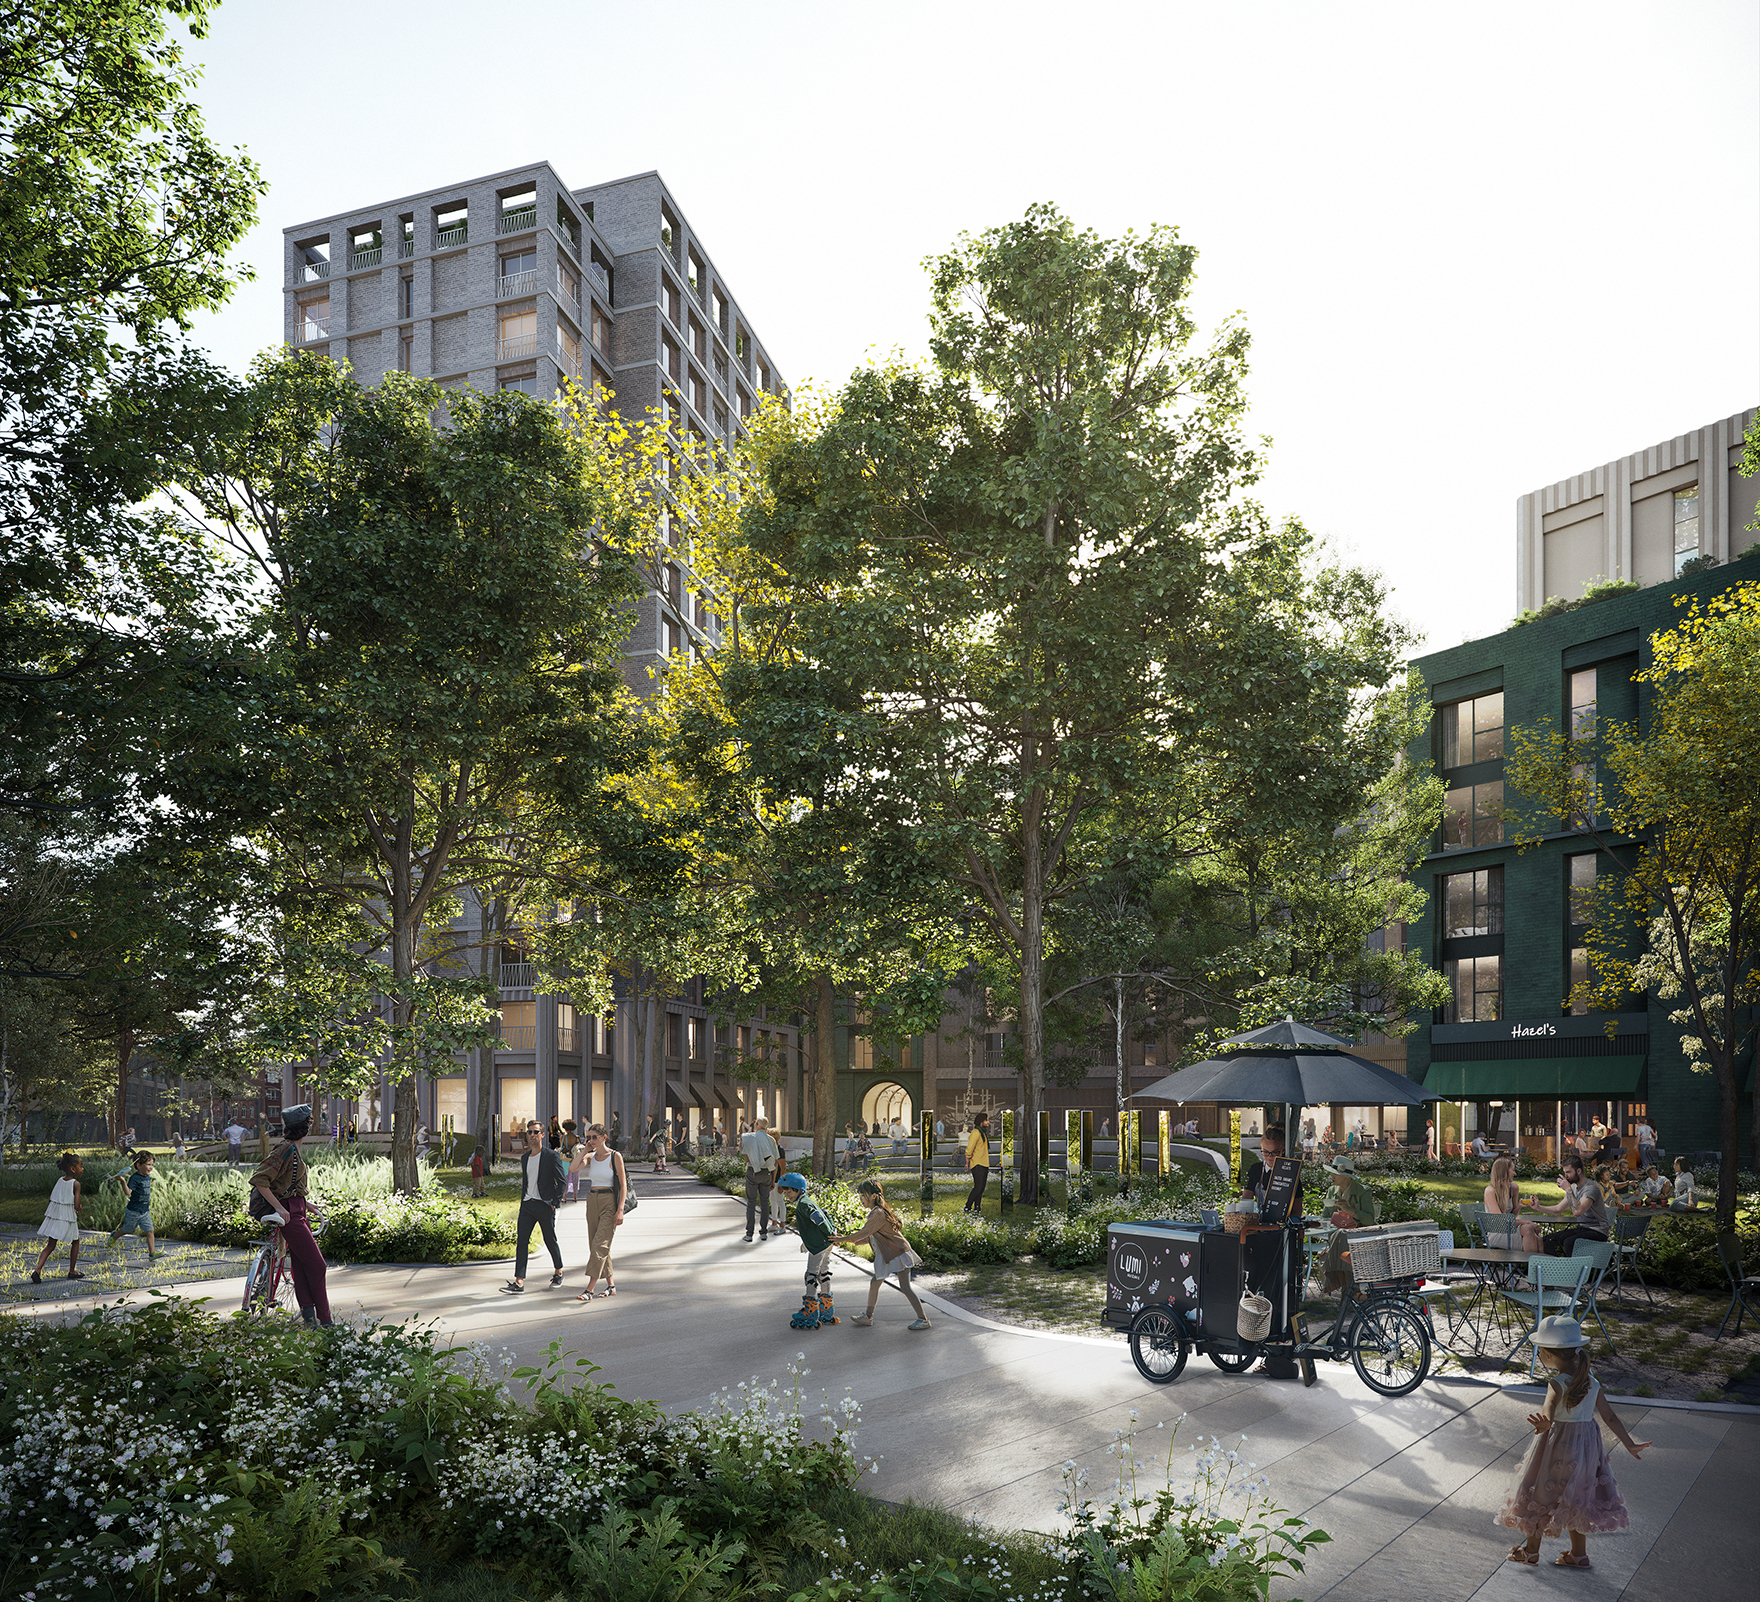 Albion Square Redevelopment Plans Revealed Woodland Urban Park Hull Faulknerbrowns Architects L